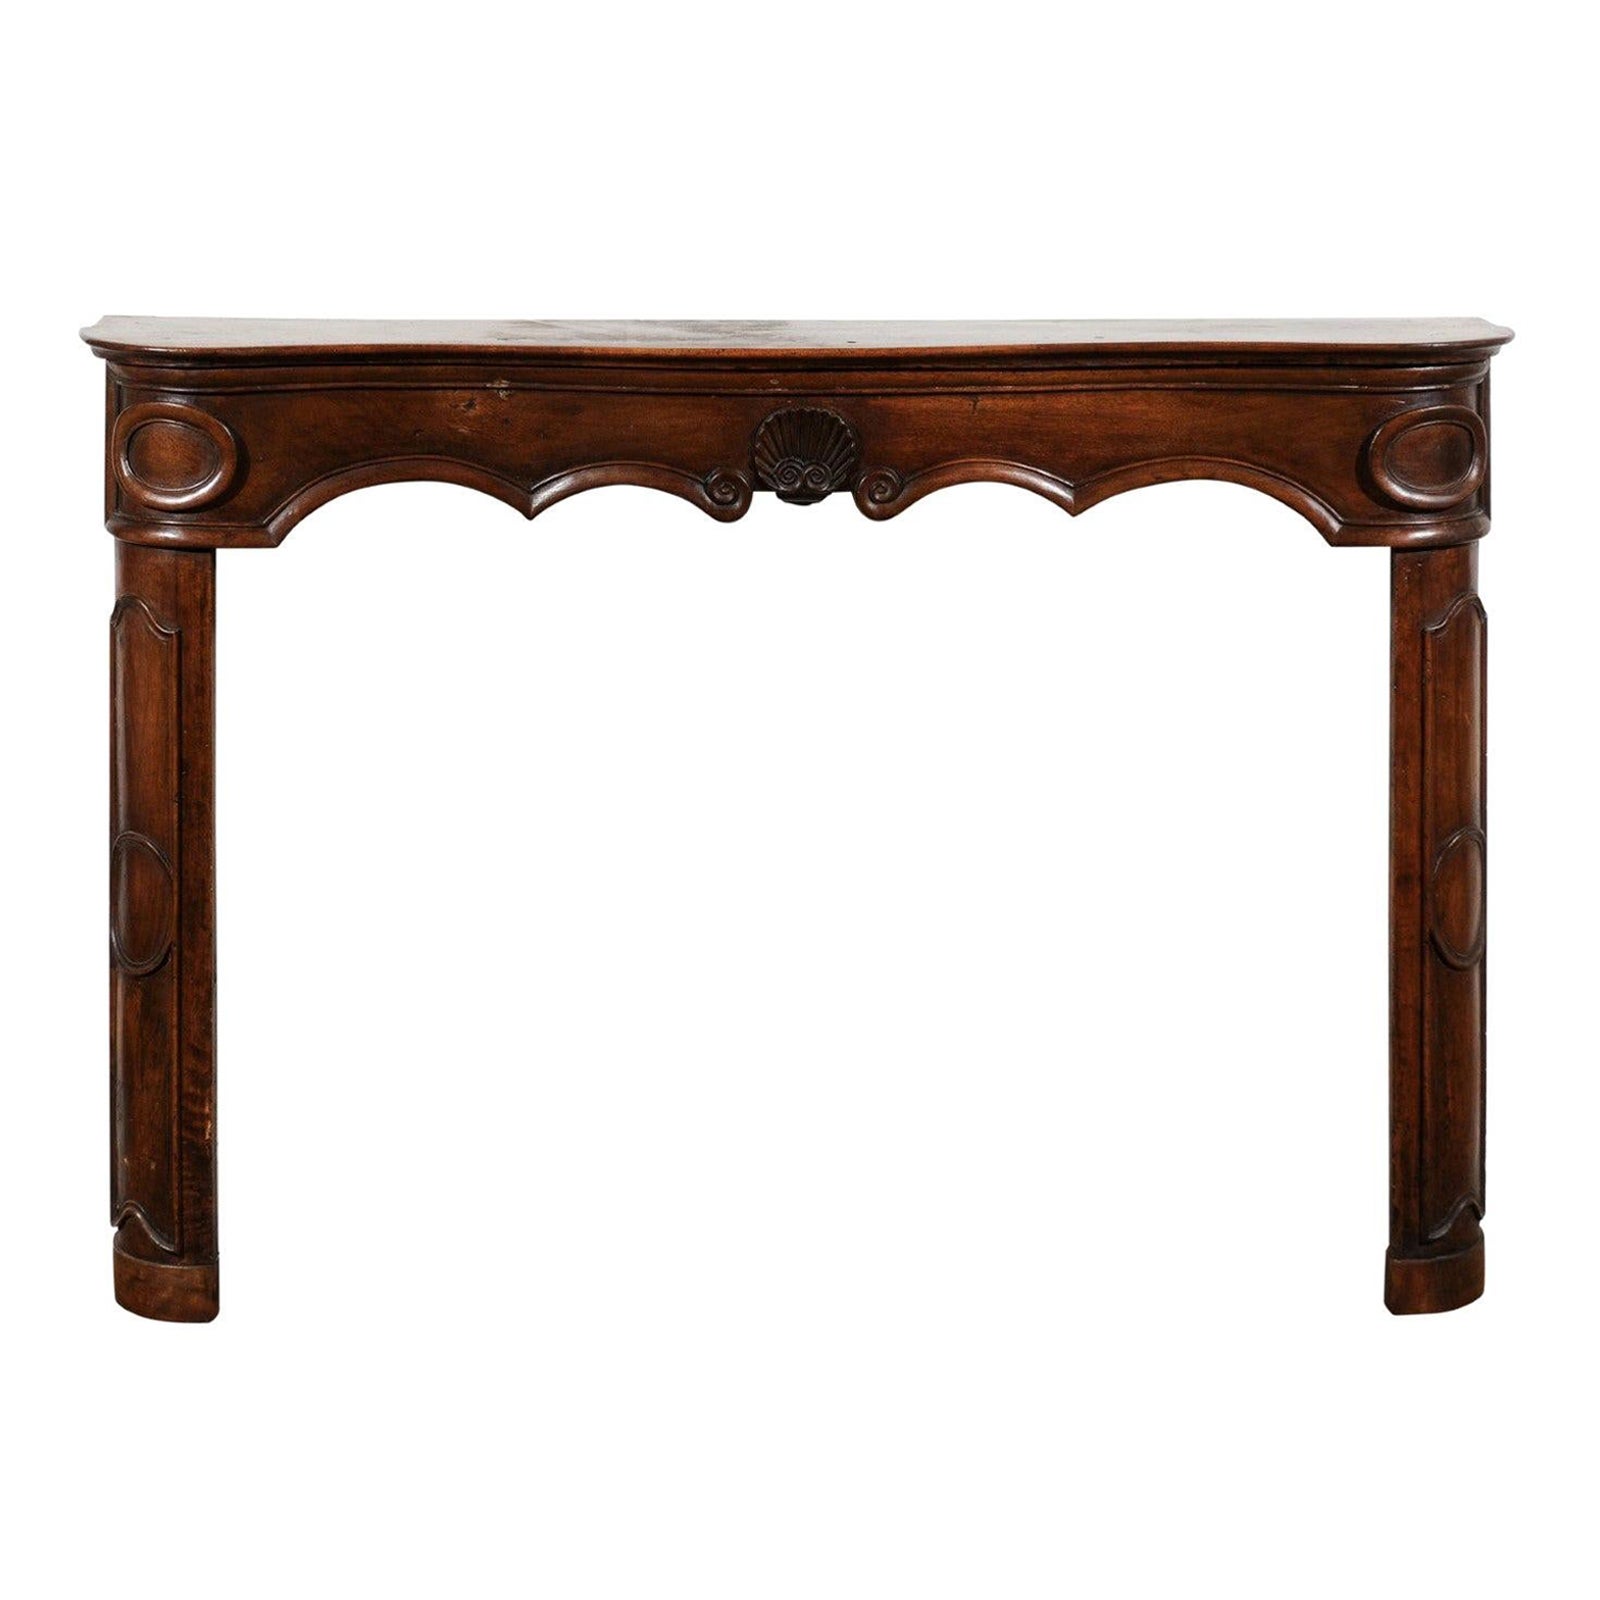 Provençal Louis XV Period 18th Century Walnut Fireplace Mantel with Carved Shell For Sale